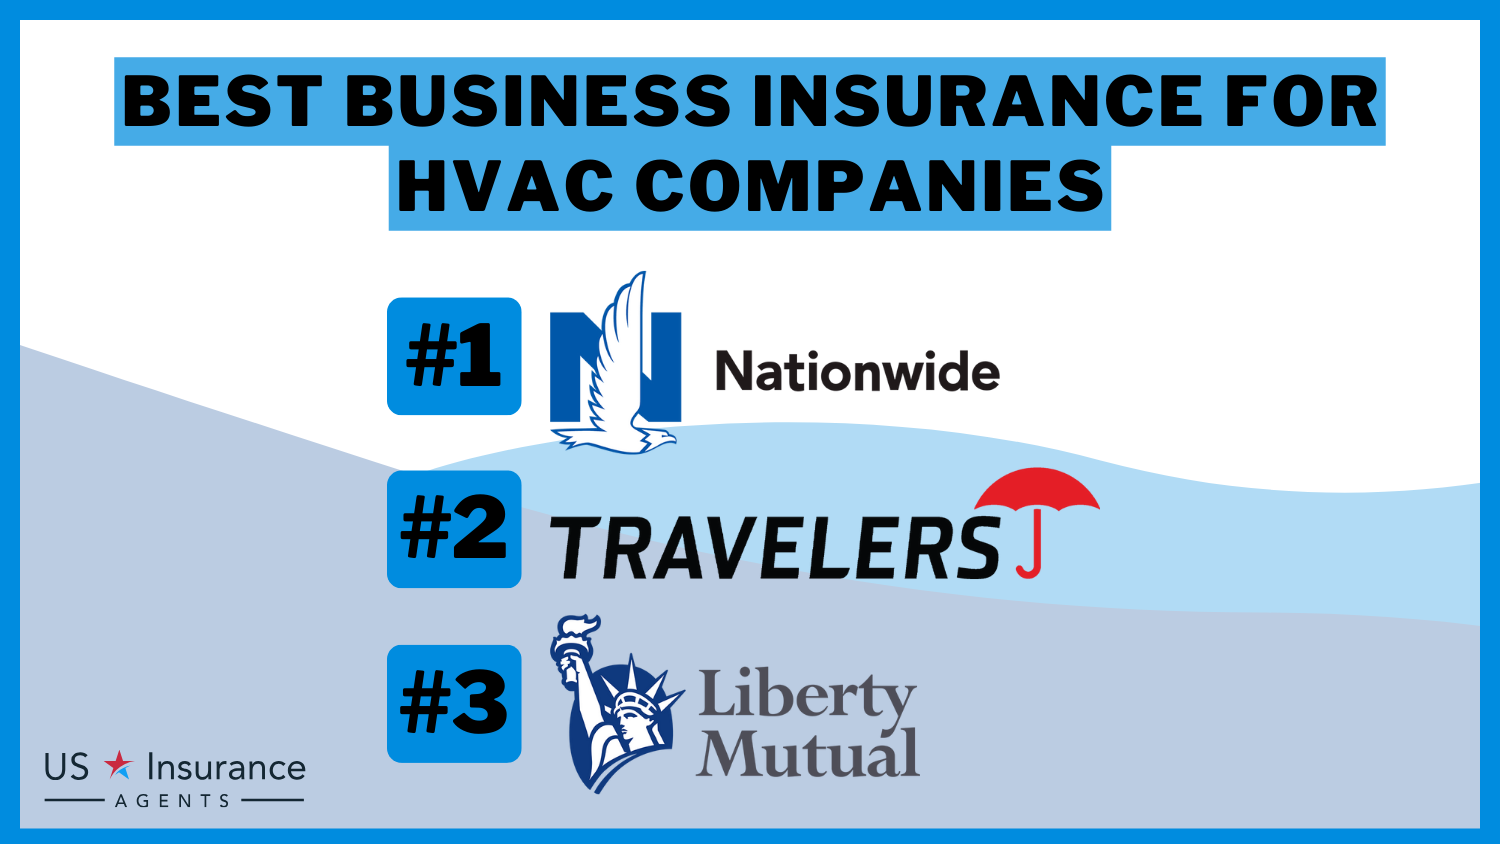 Nationwide, Travelers, Liberty Mutual: Best Business Insurance for HVAC Companies